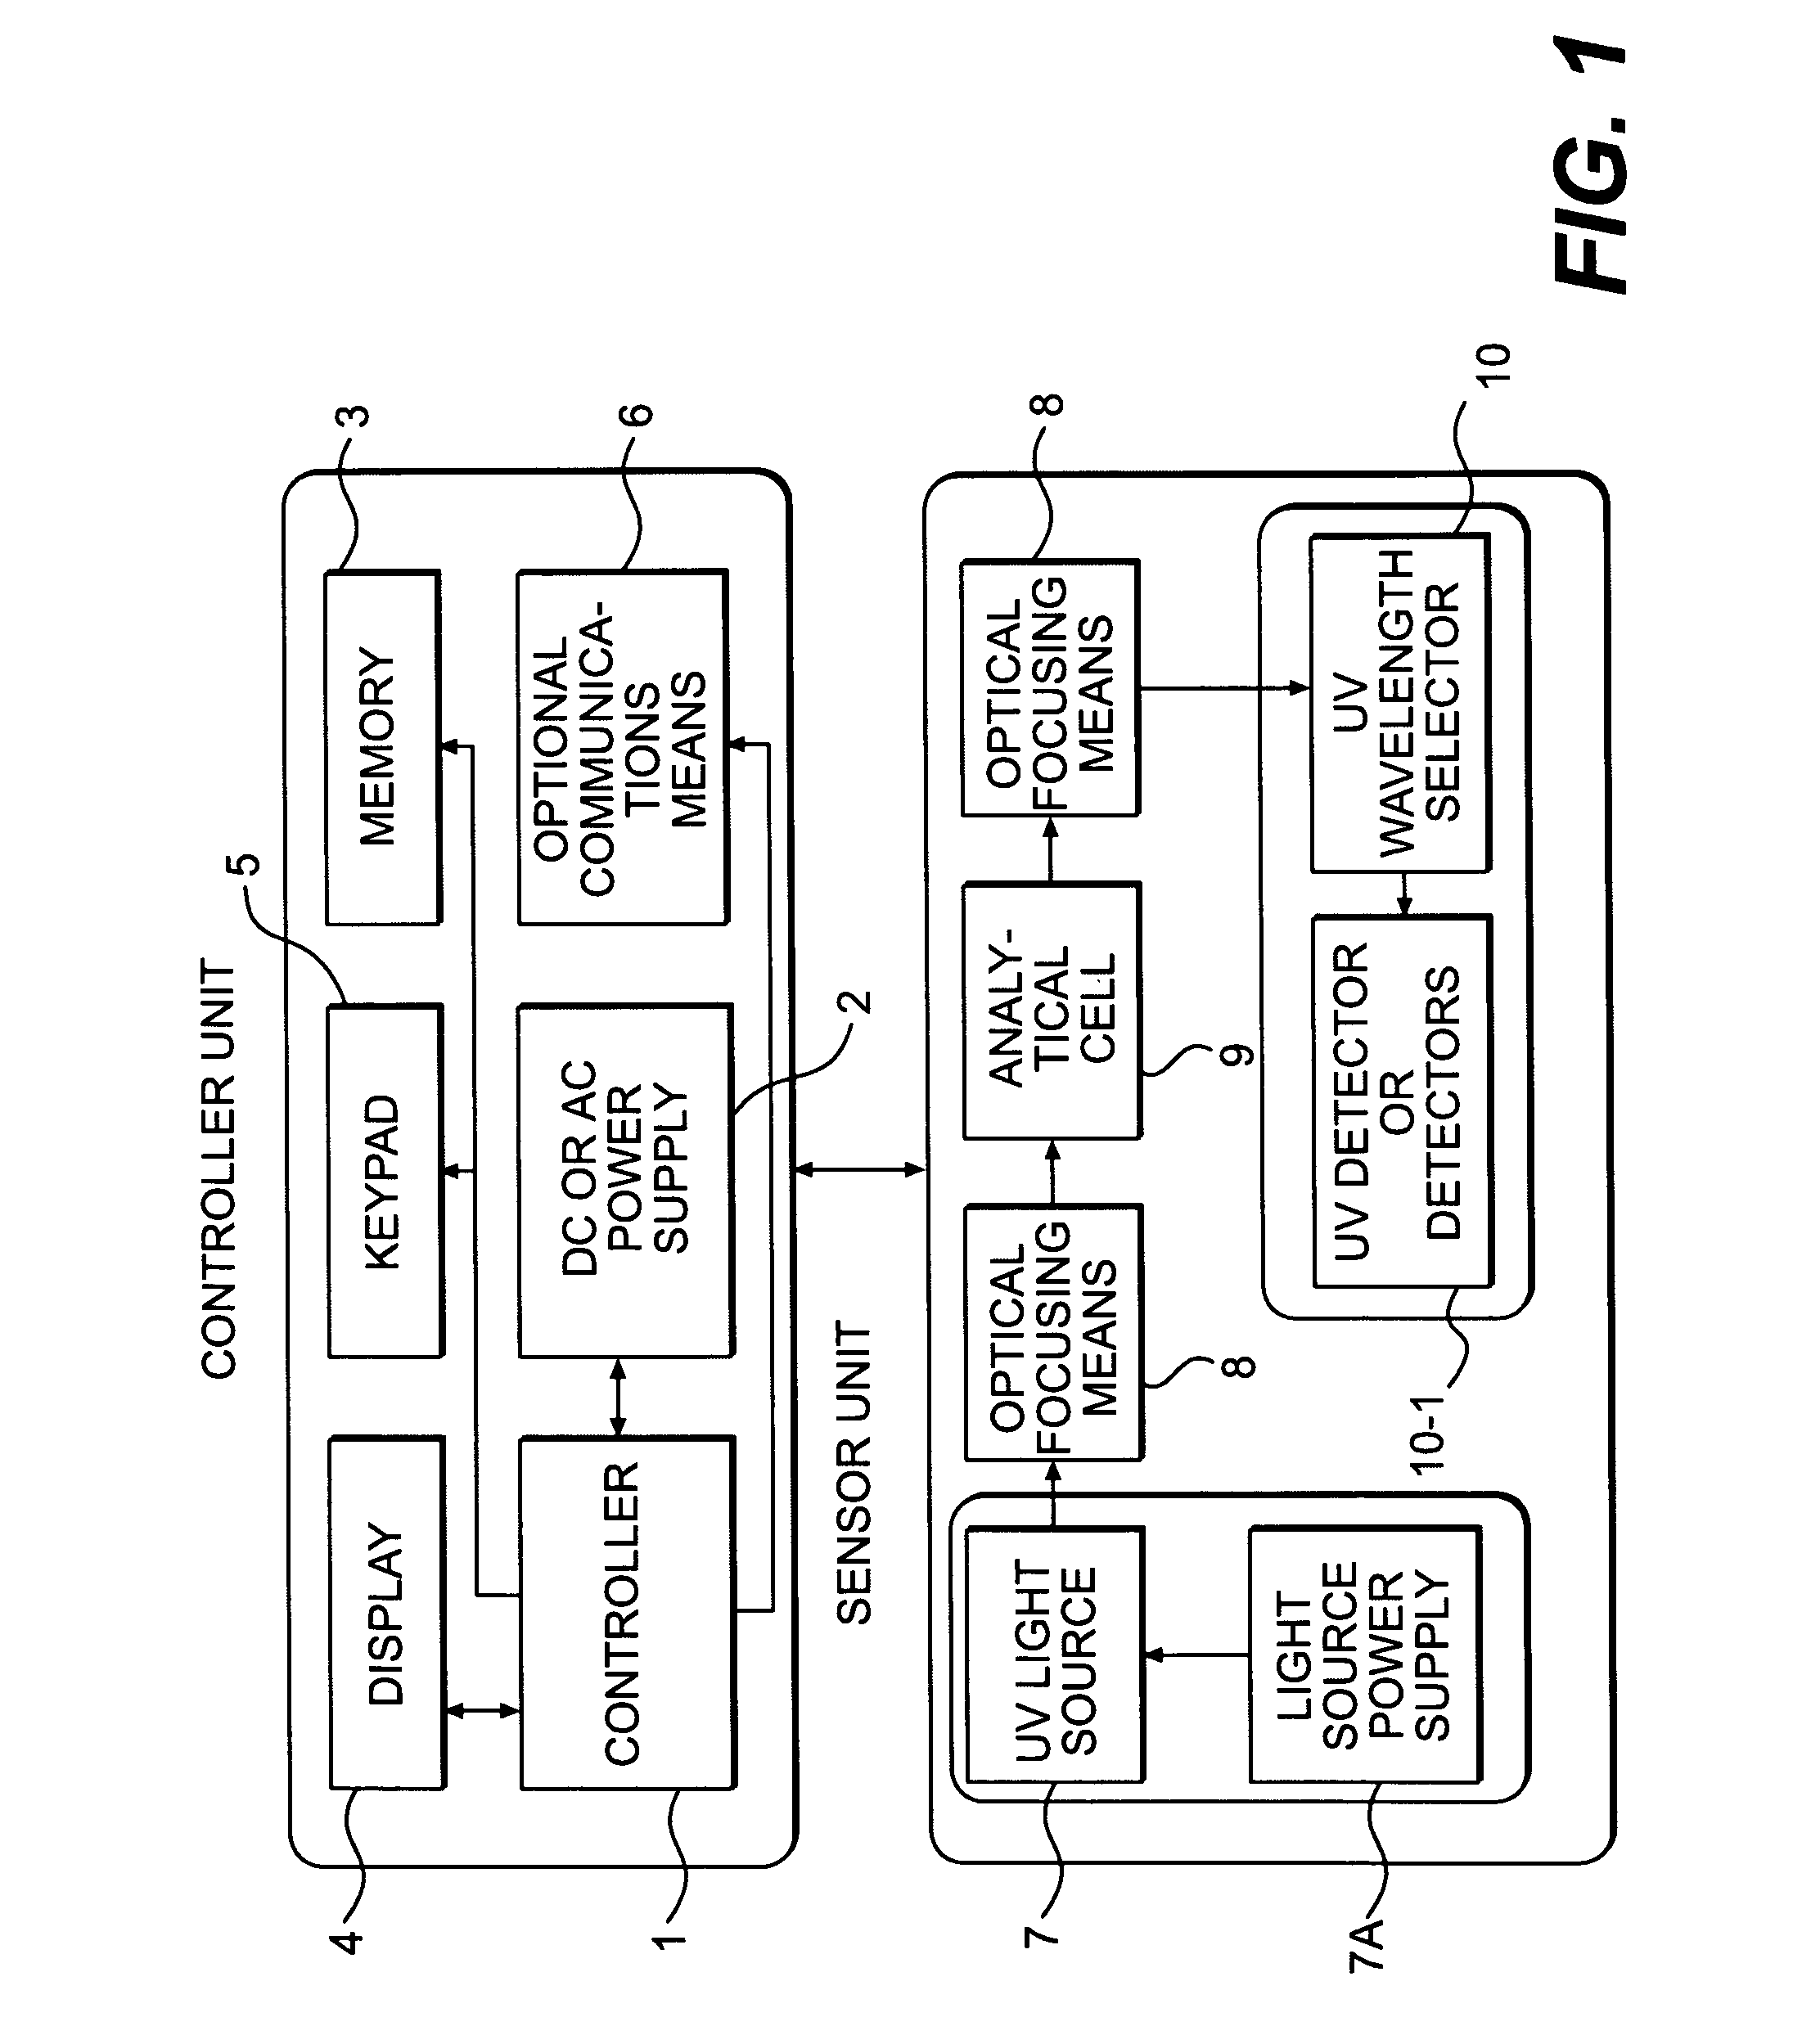 Near UV absorption spectrometer and method for using the same